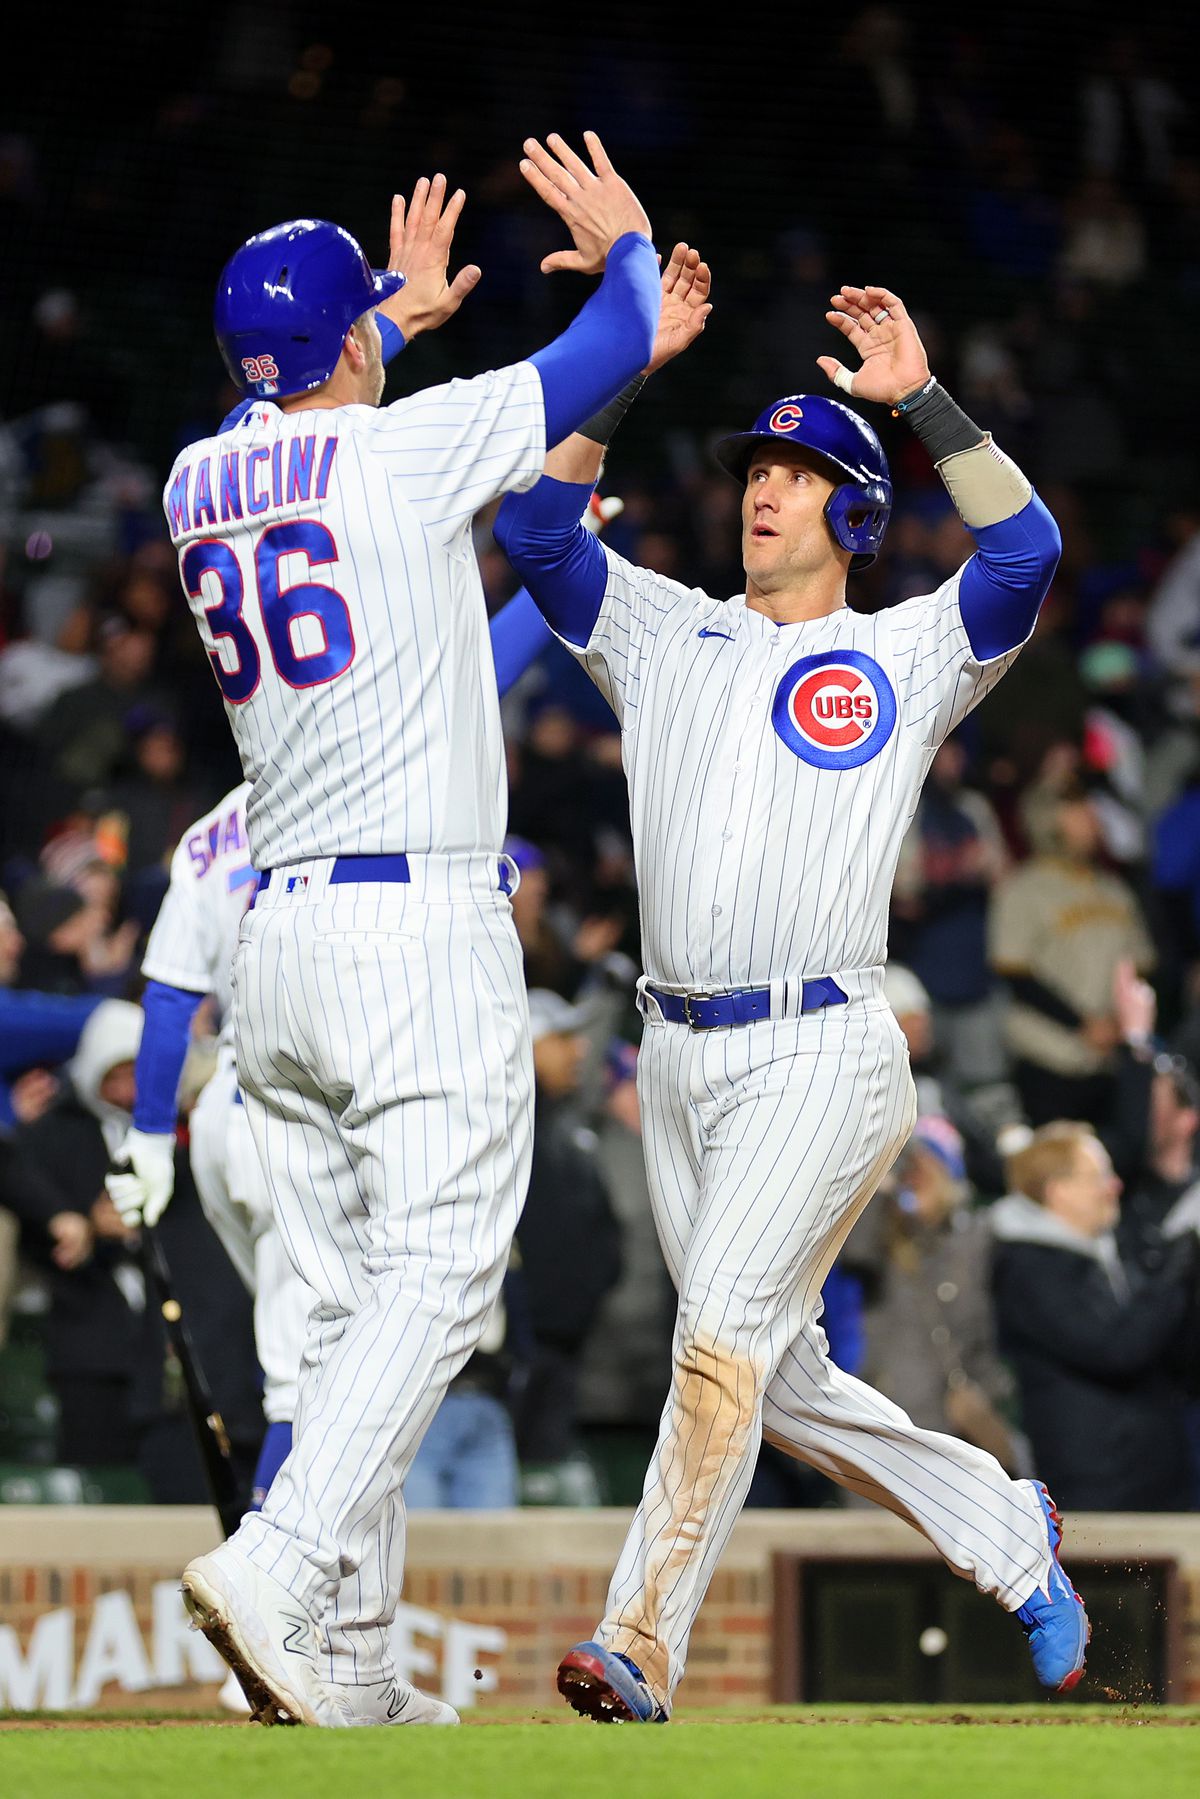 Yan Gomes #15 and Trey Mancini #36 of the Chicago Cubs celebrate after scoring a run on a three-RBI triple by Nico Hoerner #2 (not pictured) during the eighth inning against the San Diego Padres at Wrigley Field on April 25, 2023 in Chicago, Illinois.